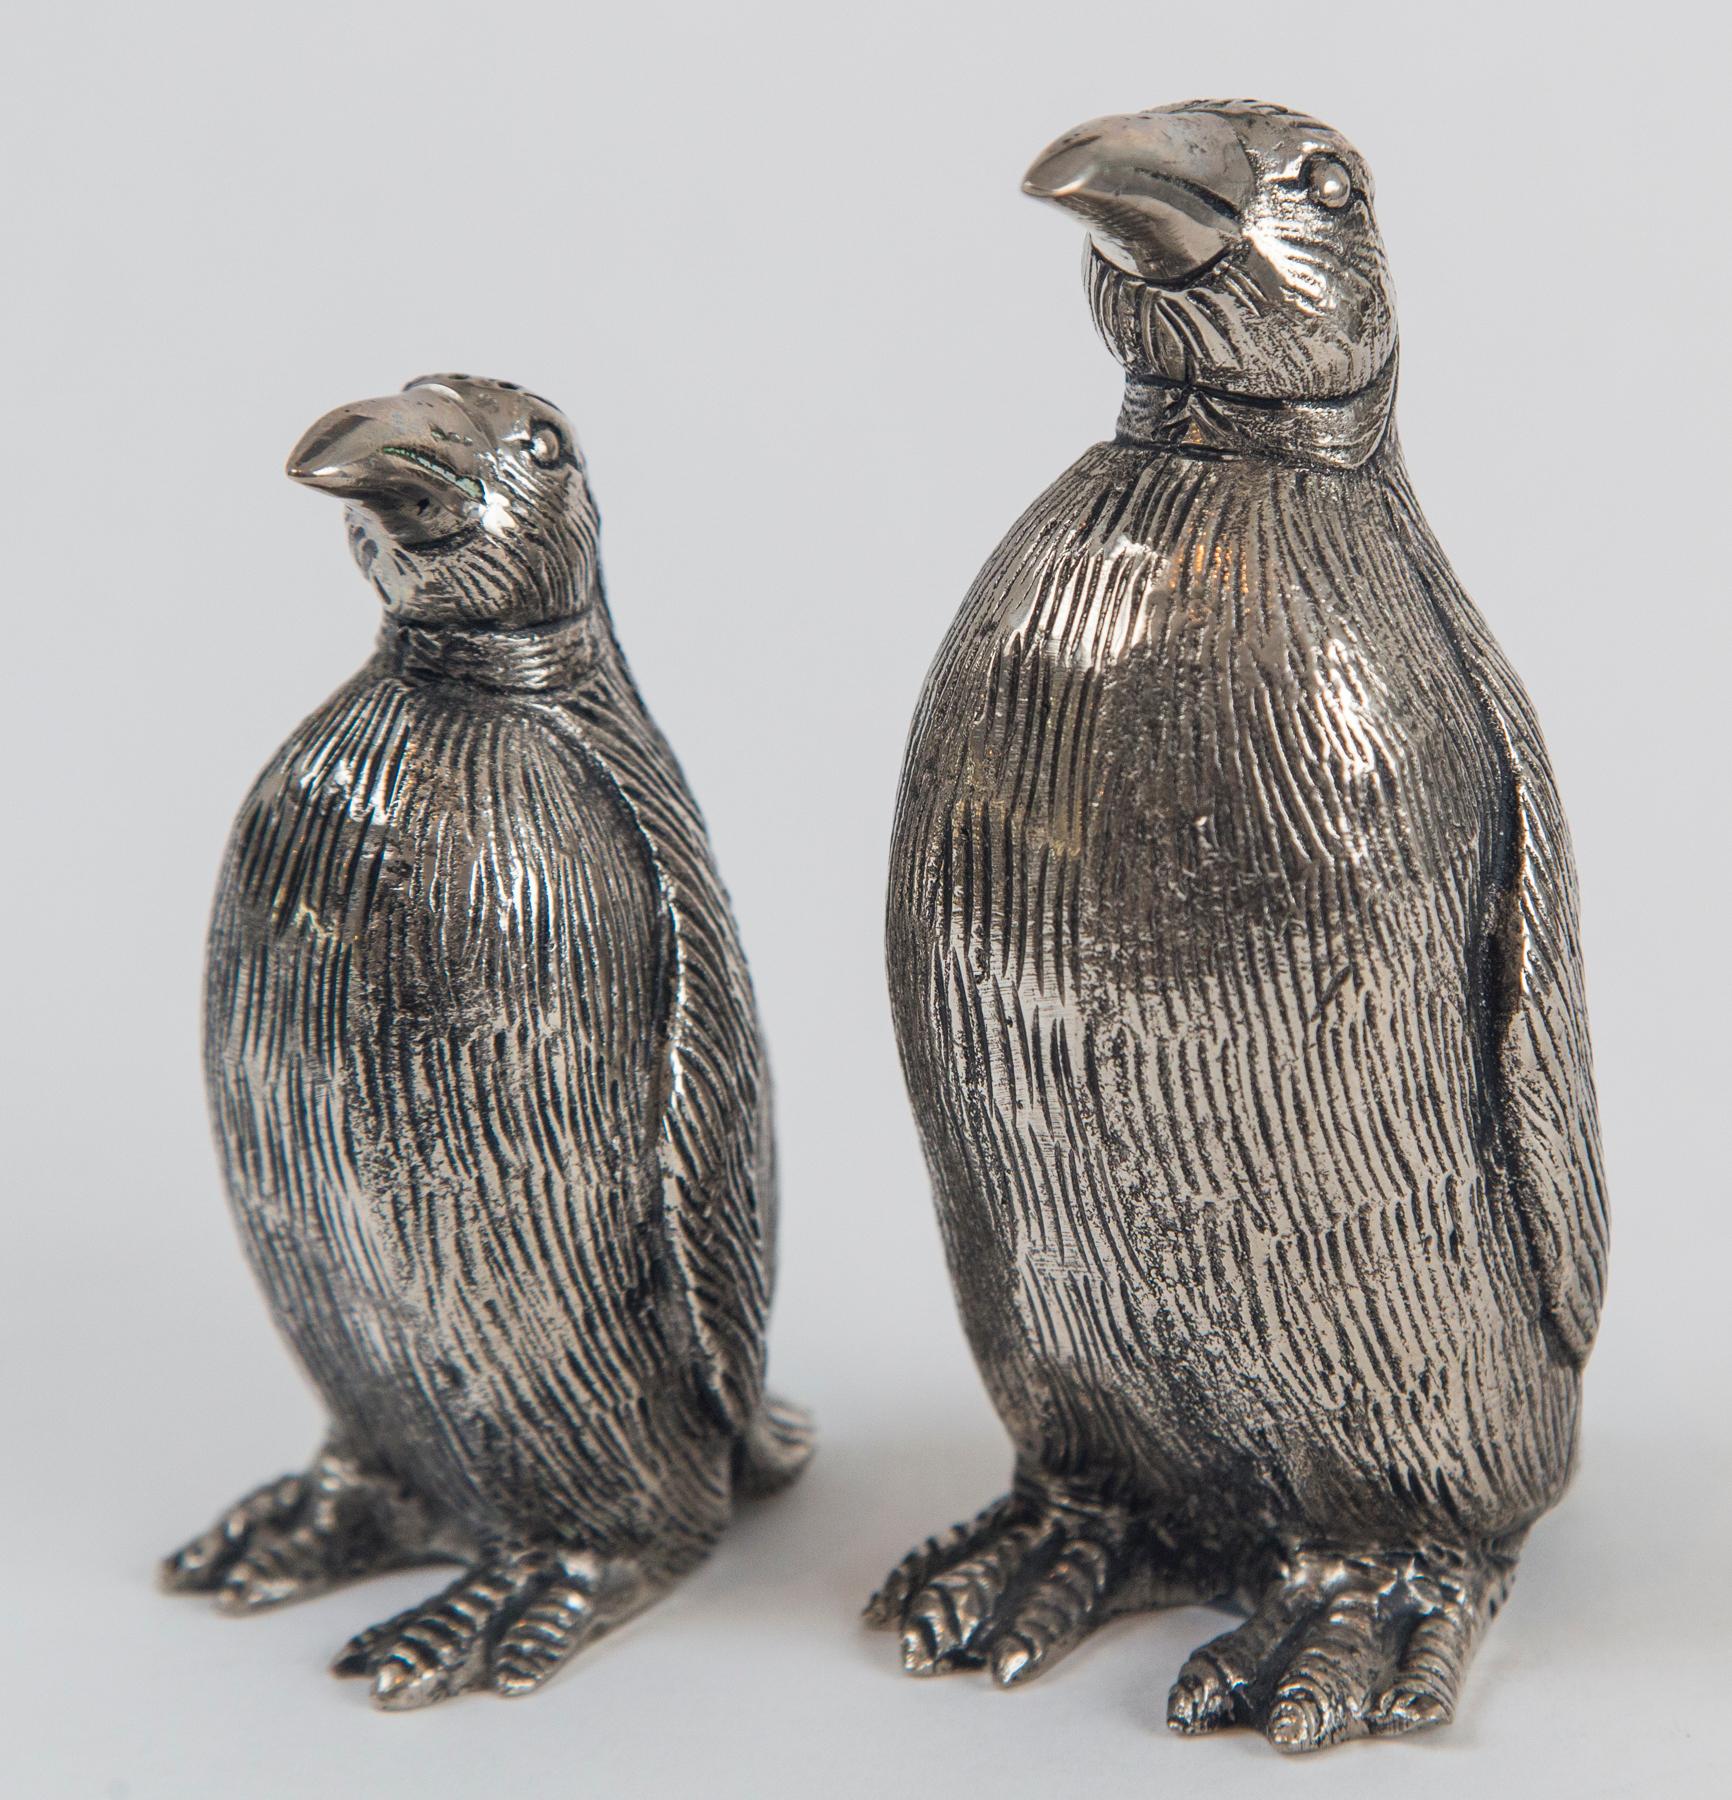 Gucci Penguin salt and pepper shakers, silver plate over pewter

Measures: Large: 5